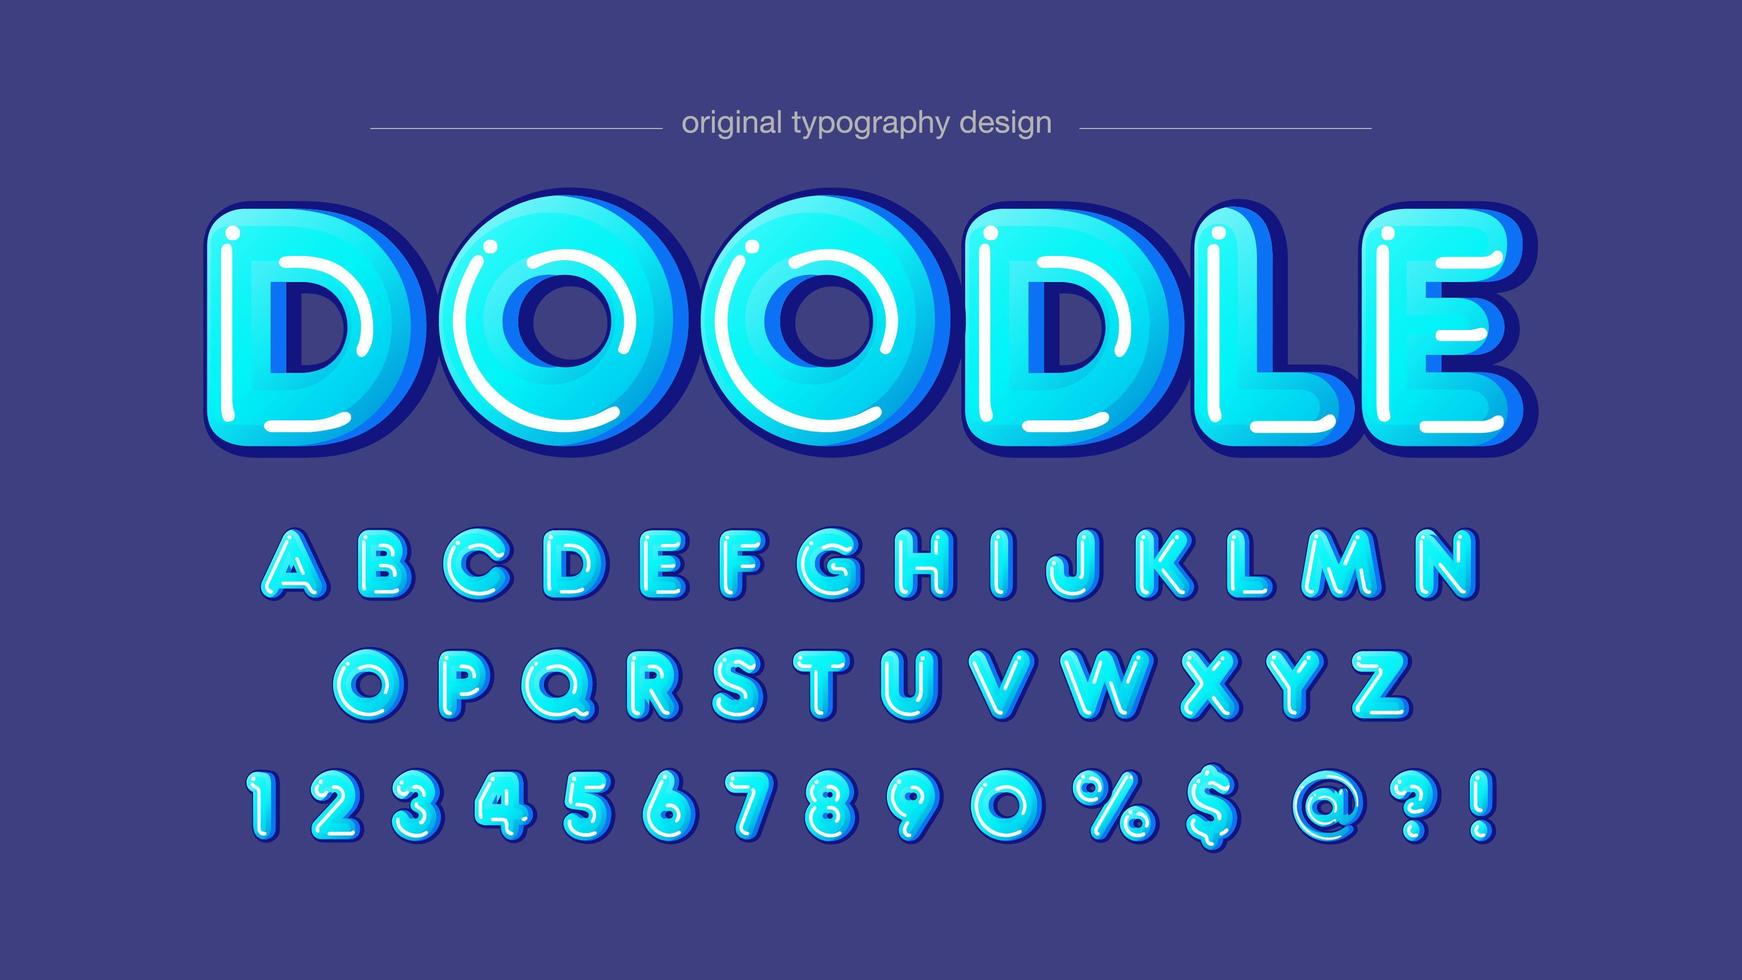 Rounded Blue Bubble Artistic Font vector